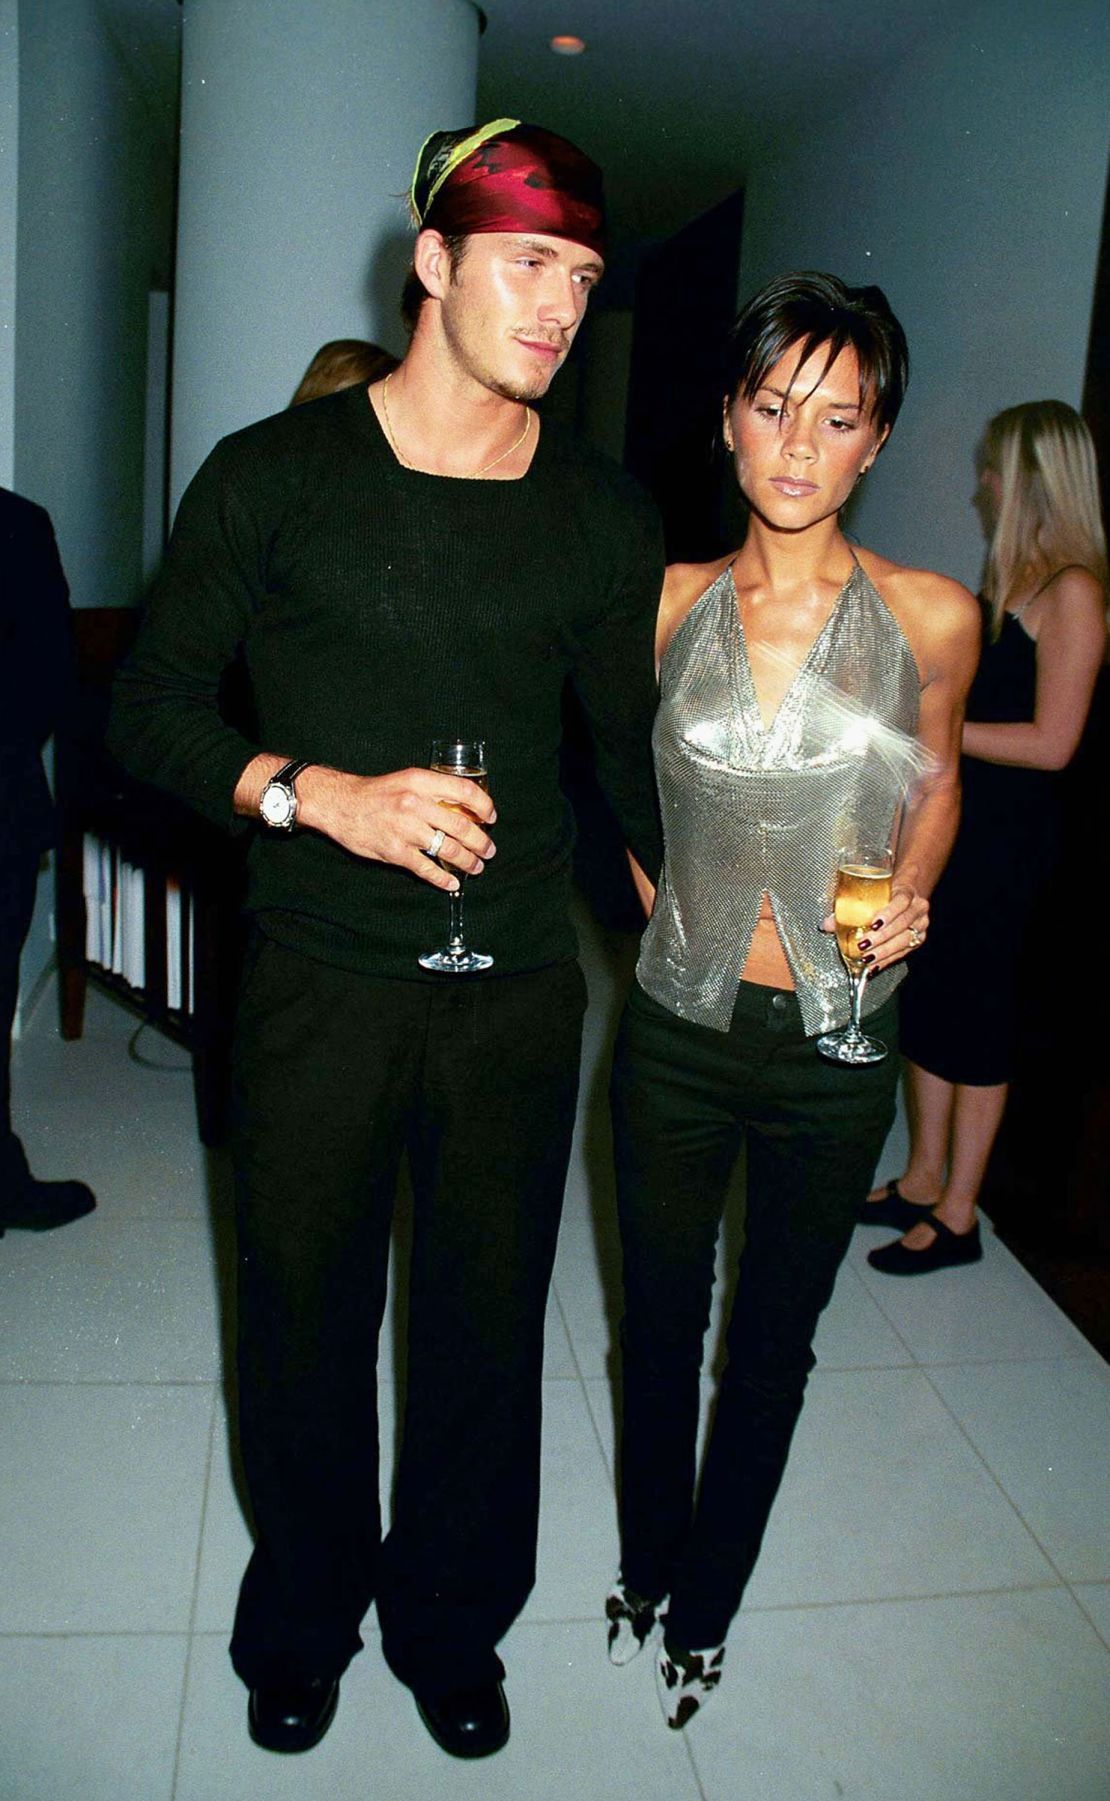 In 1999, the Beckhams attended the launch of Jade Jagger’s jewelry line in London. David wore a silk headscarf, while Victoria stepped out in cow-print heels and a halter-neck chainmail top.